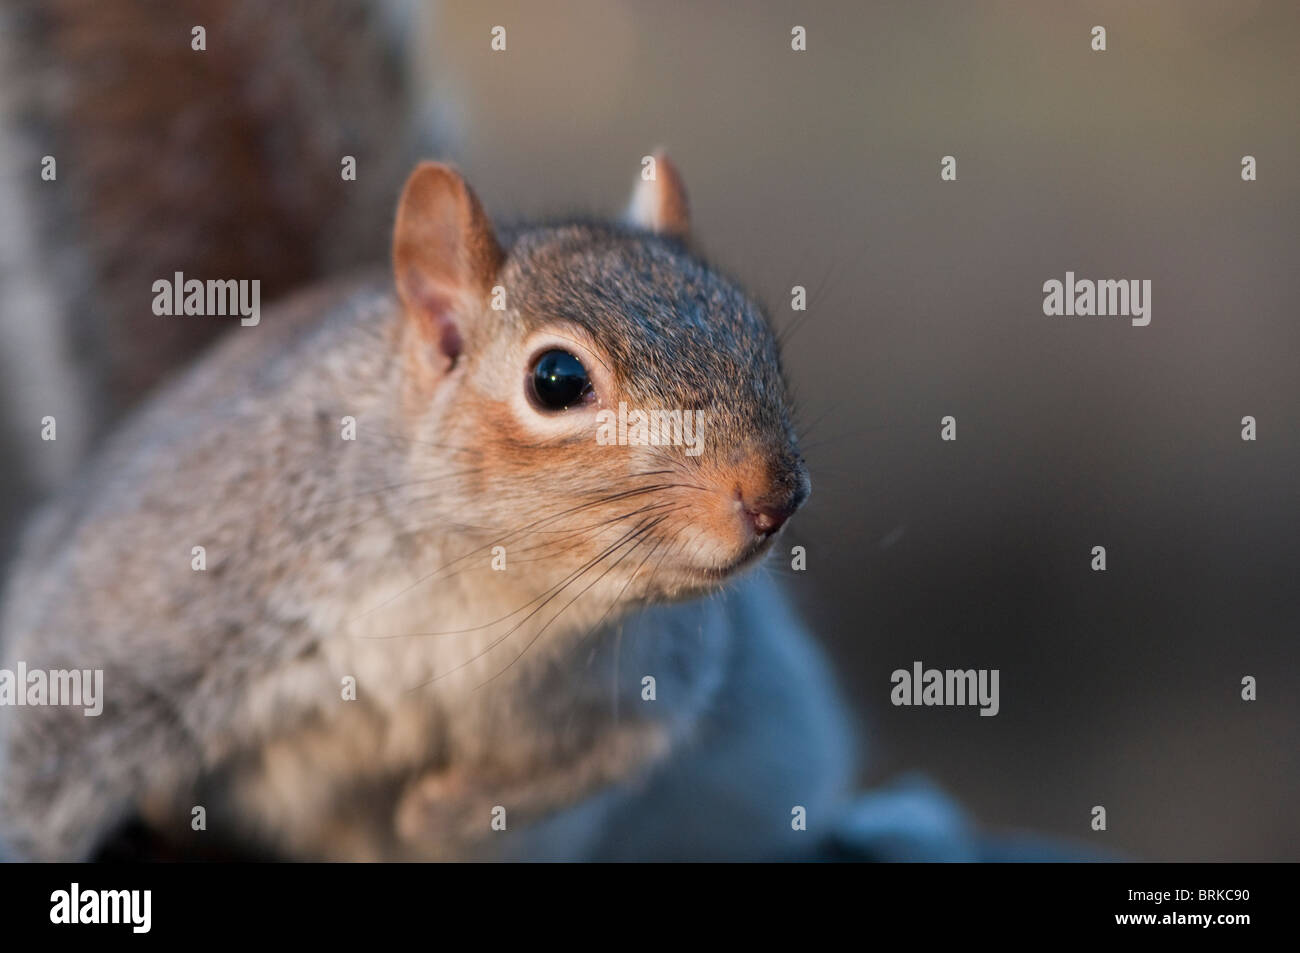 Grey / gray squirrel poised for action in St James' Park, London, UK Stock Photo